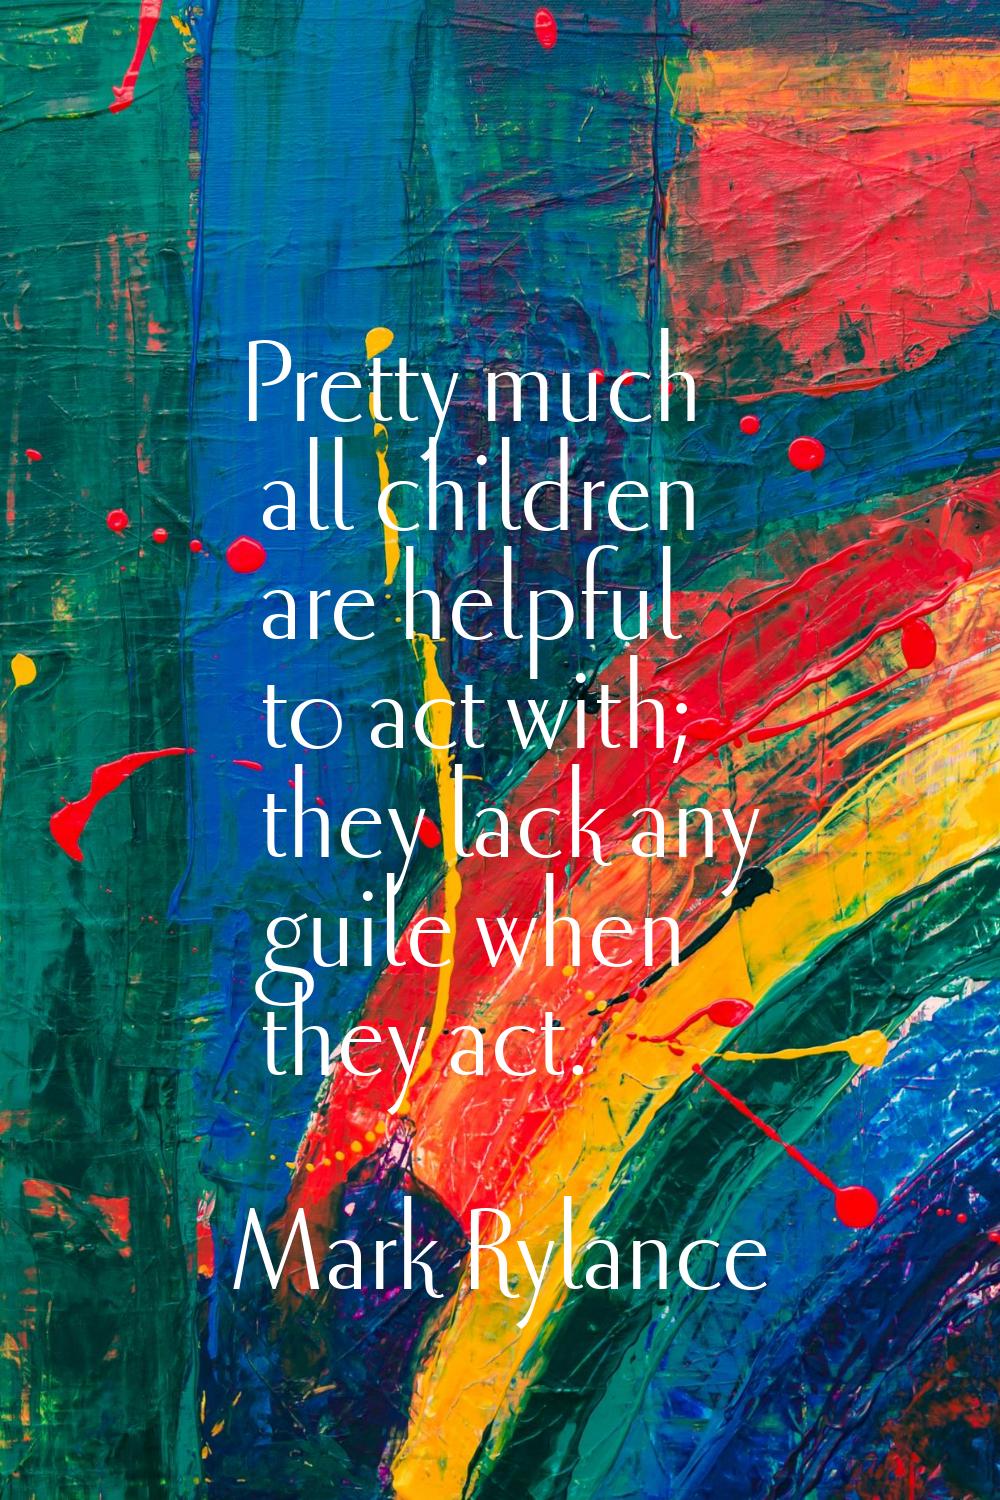 Pretty much all children are helpful to act with; they lack any guile when they act.